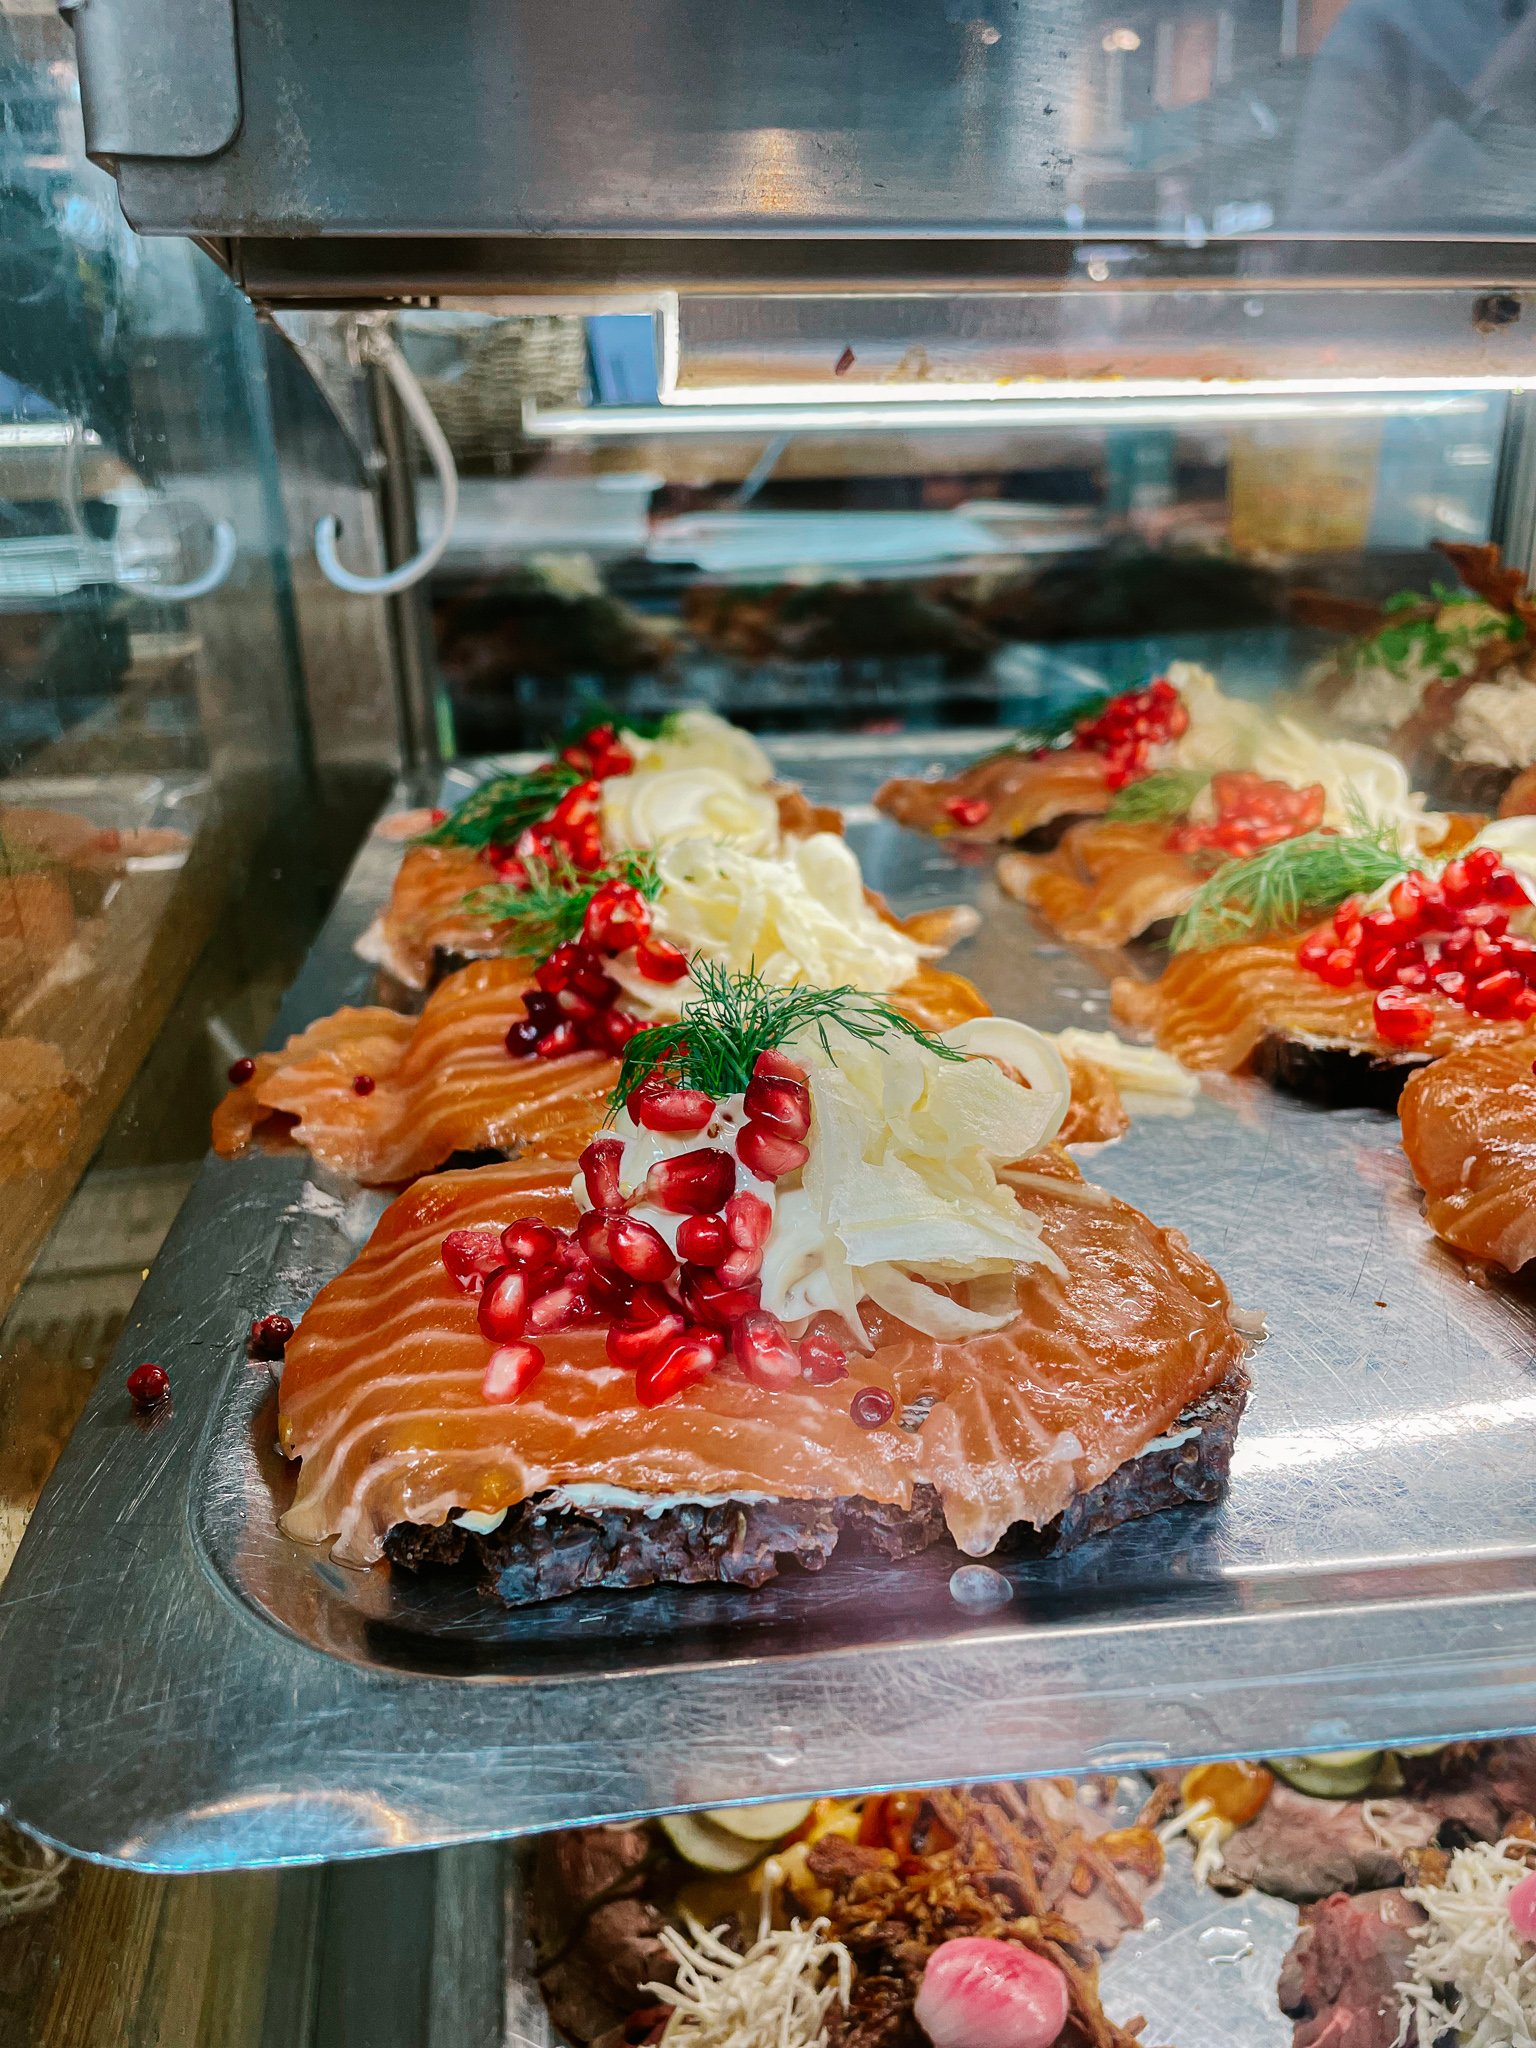 An open faced sandwich called Smorrebrod, with salmon, pomegranite seeds and ginger on top on a steel tray in Tovehallerne in Copenhagen.